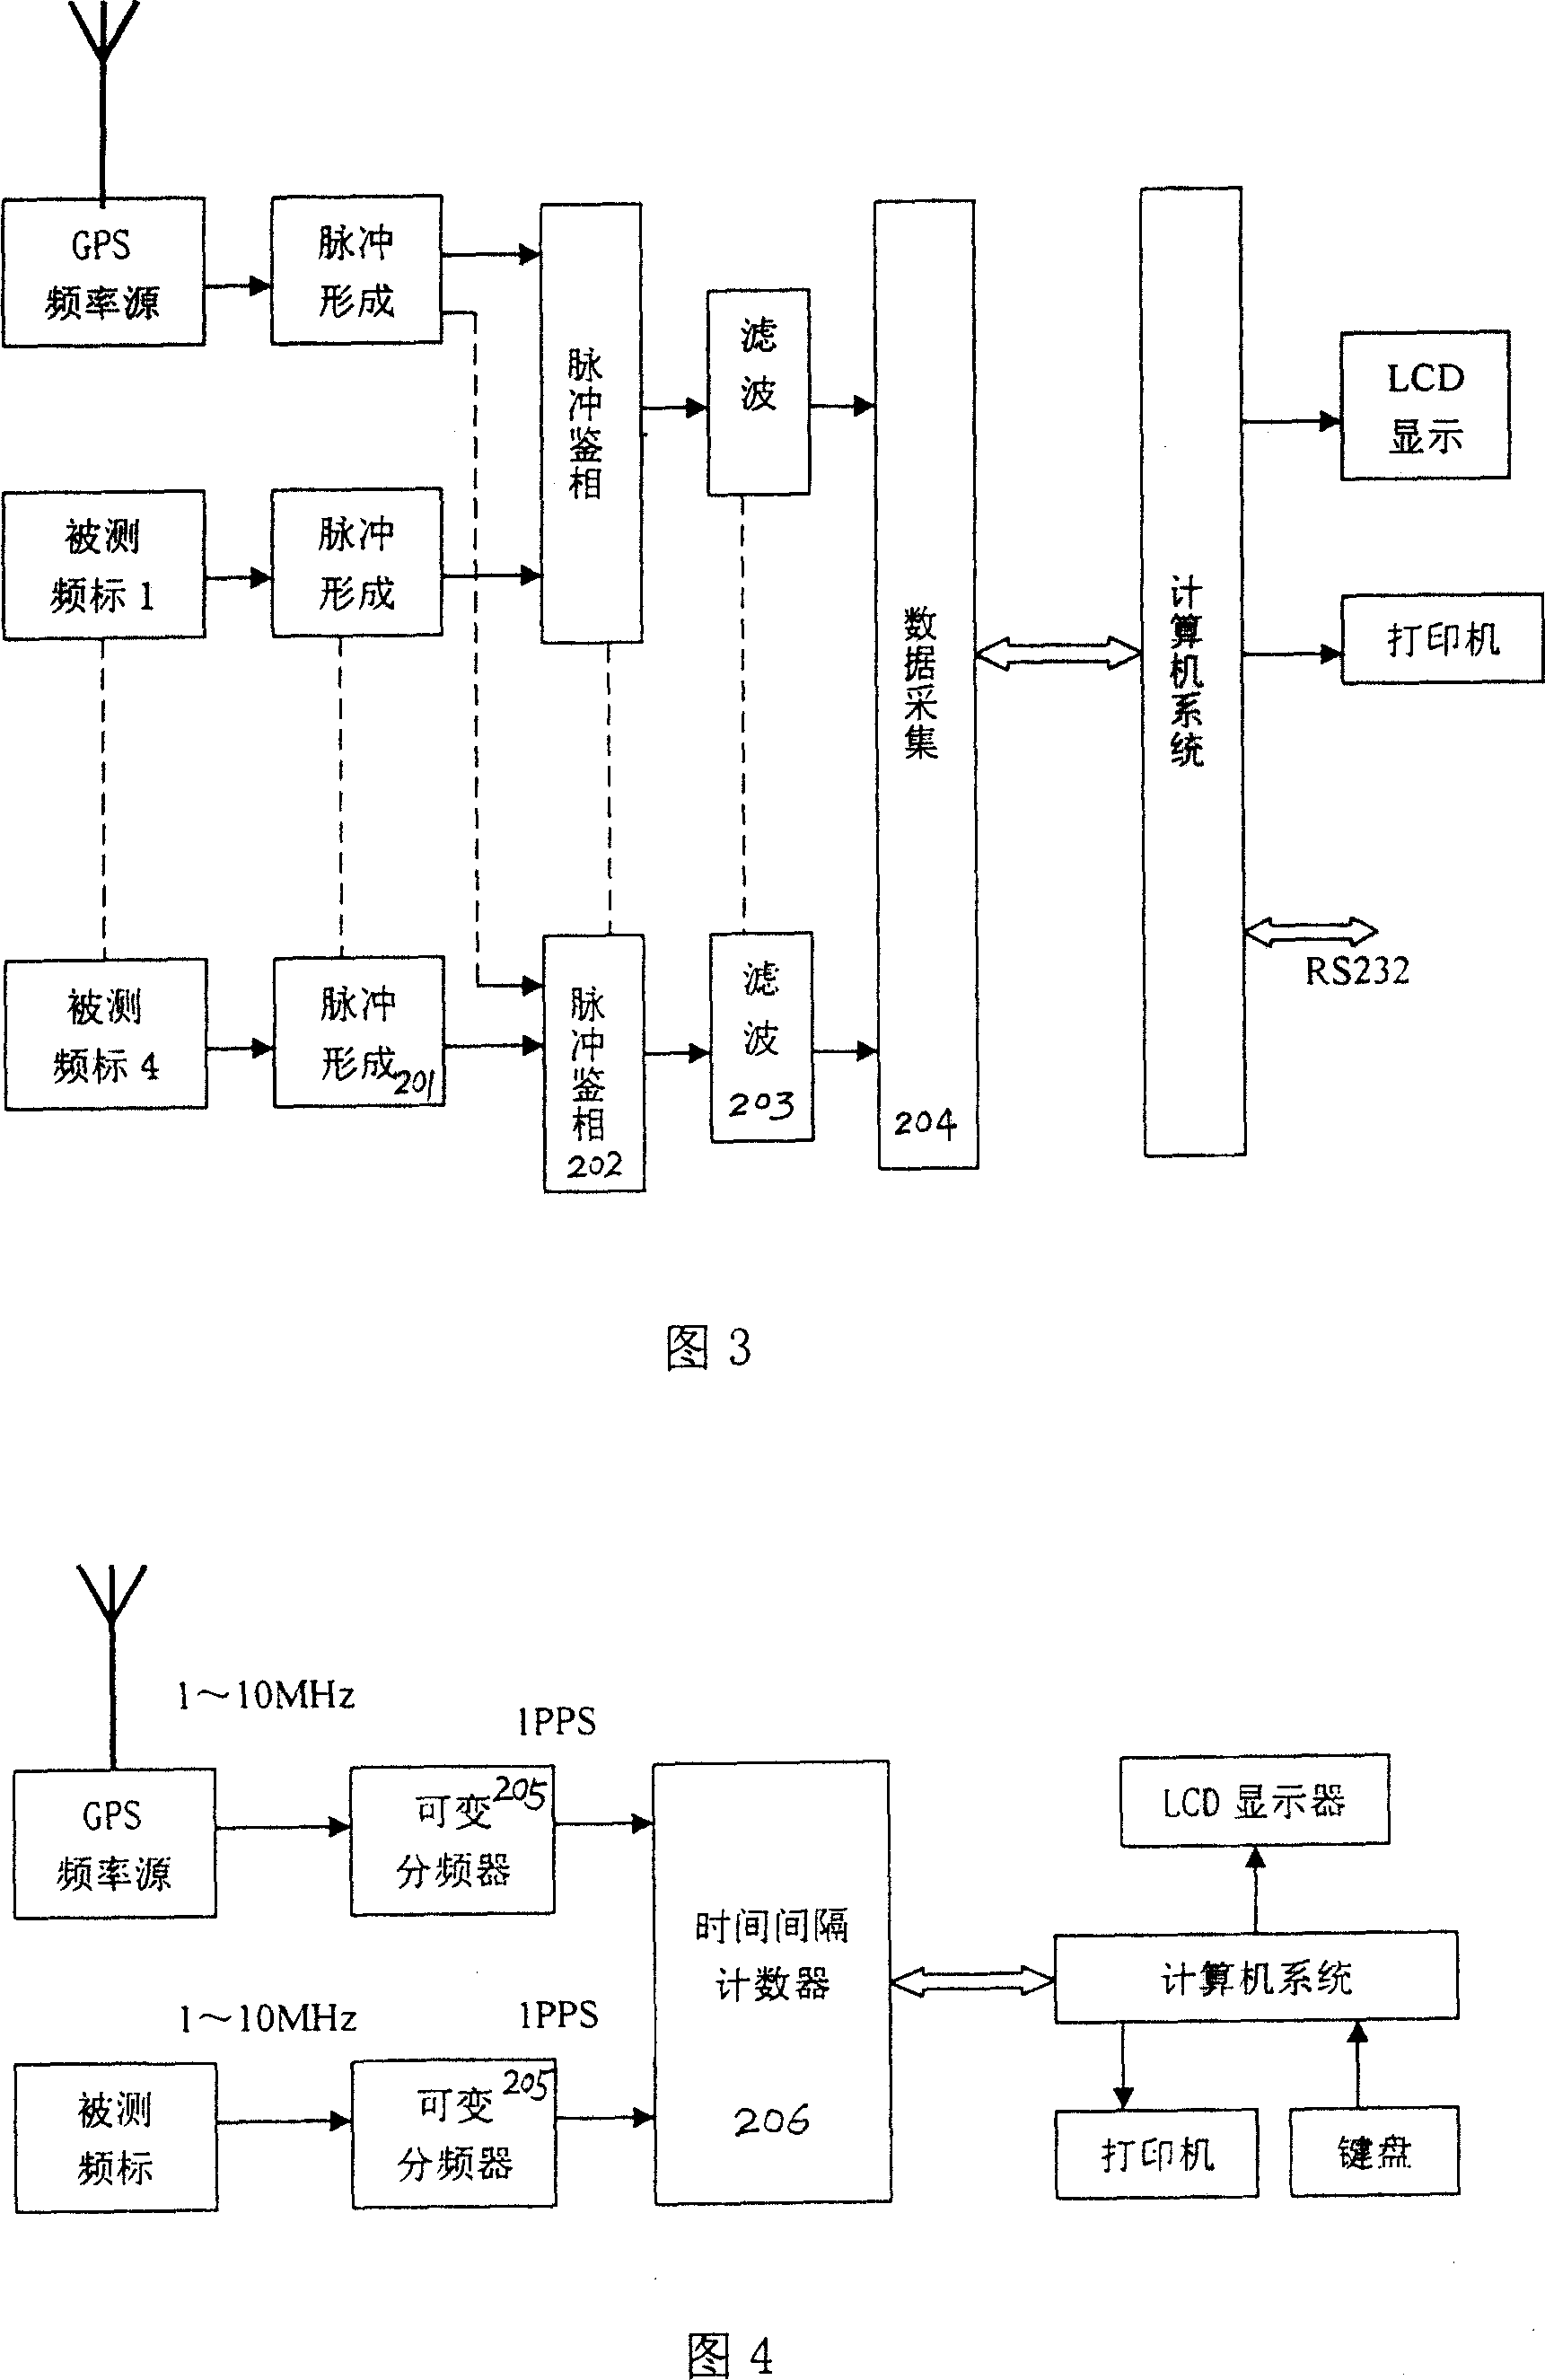 Frequency marker calibrating system based on GPS frequency standard source